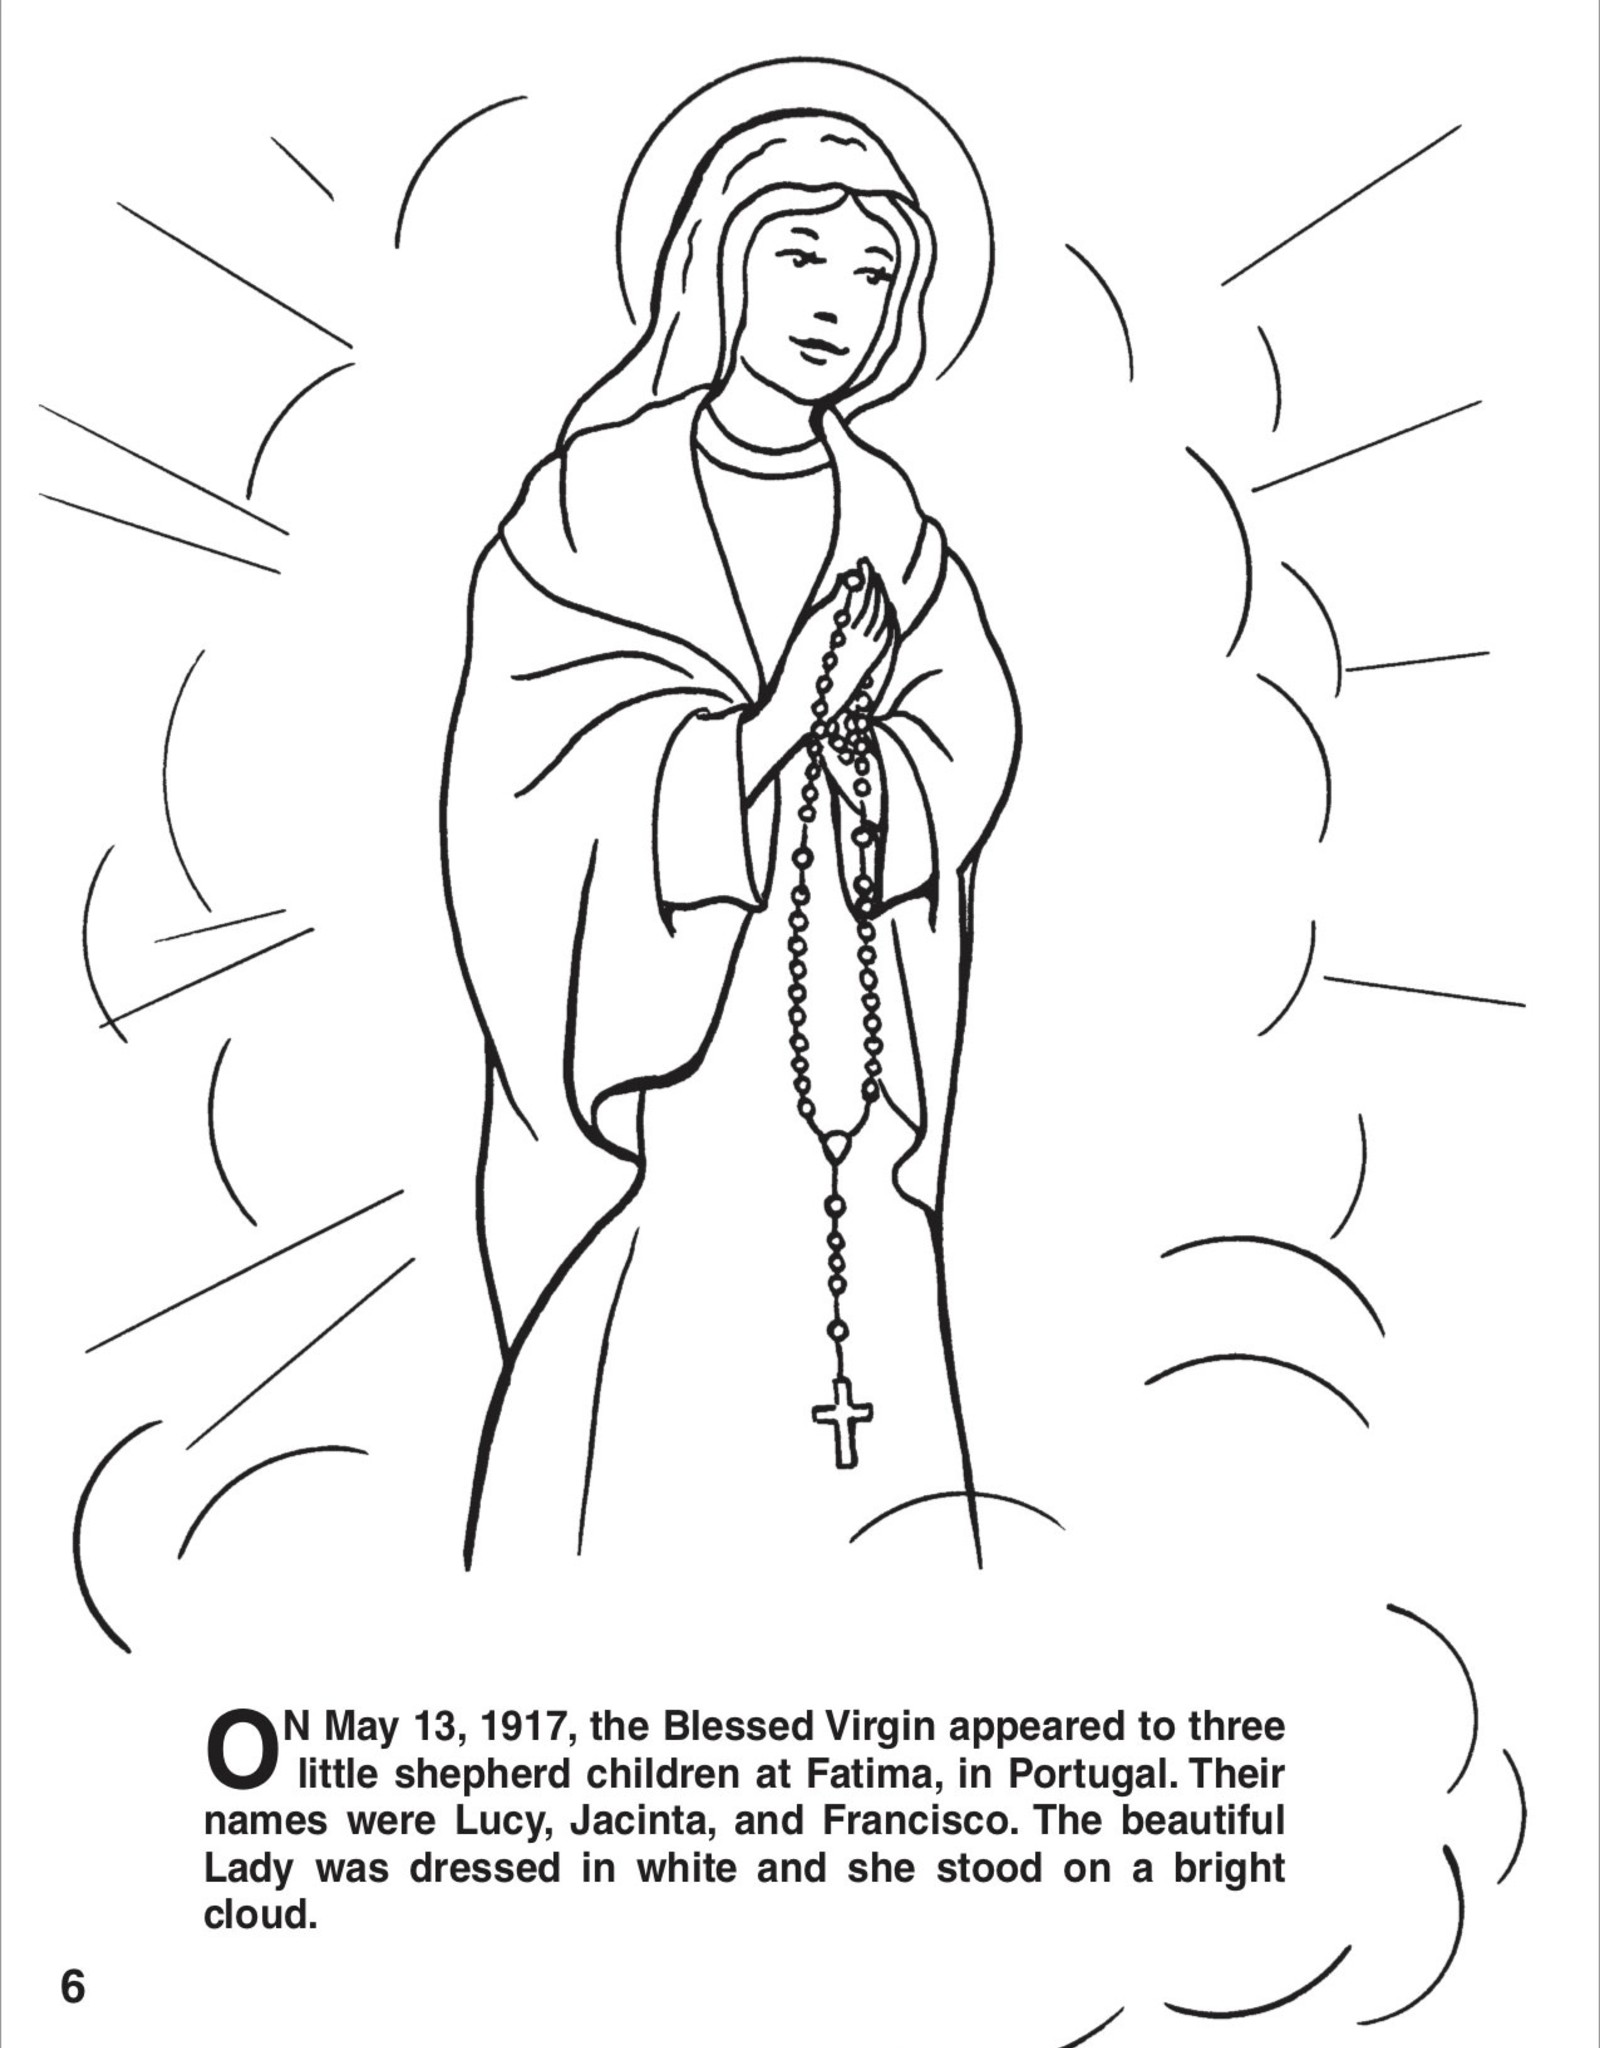 Coloring book about the rosary by lawrence lovasik and pictures by emma mckean